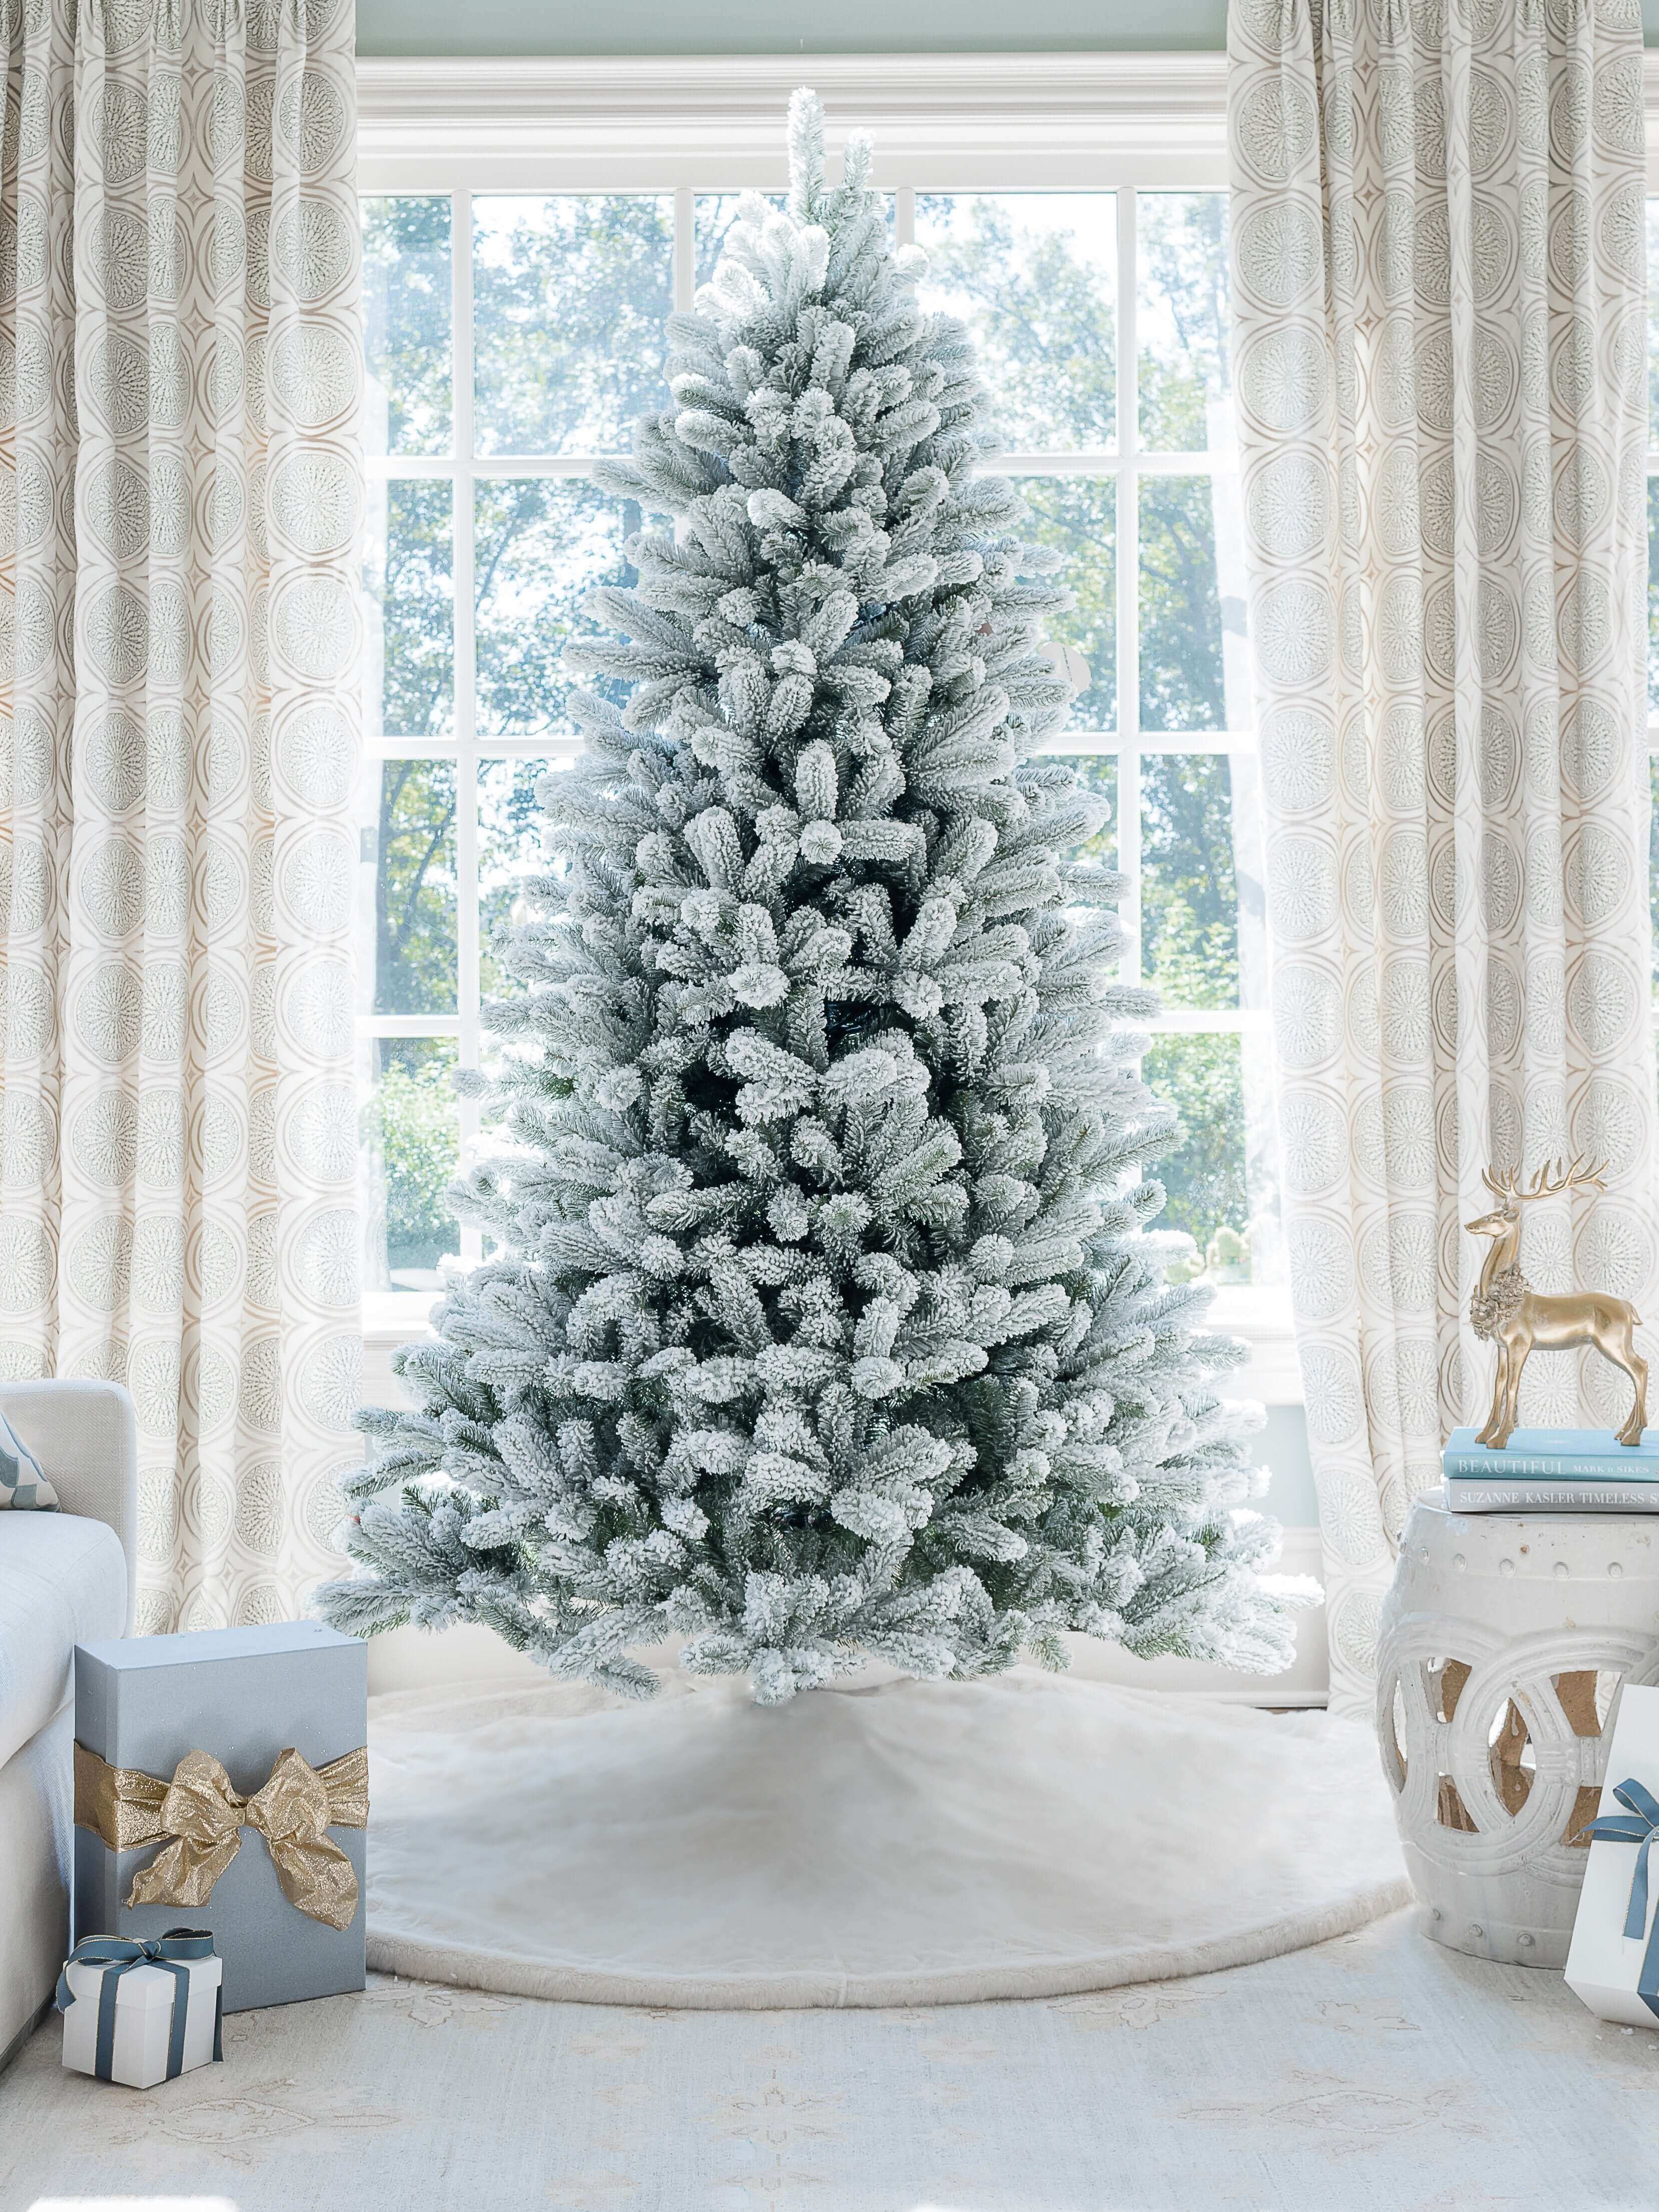 King of Christmas 10' King Flock® Artificial Christmas Tree with 1250 Warm White LED Lights